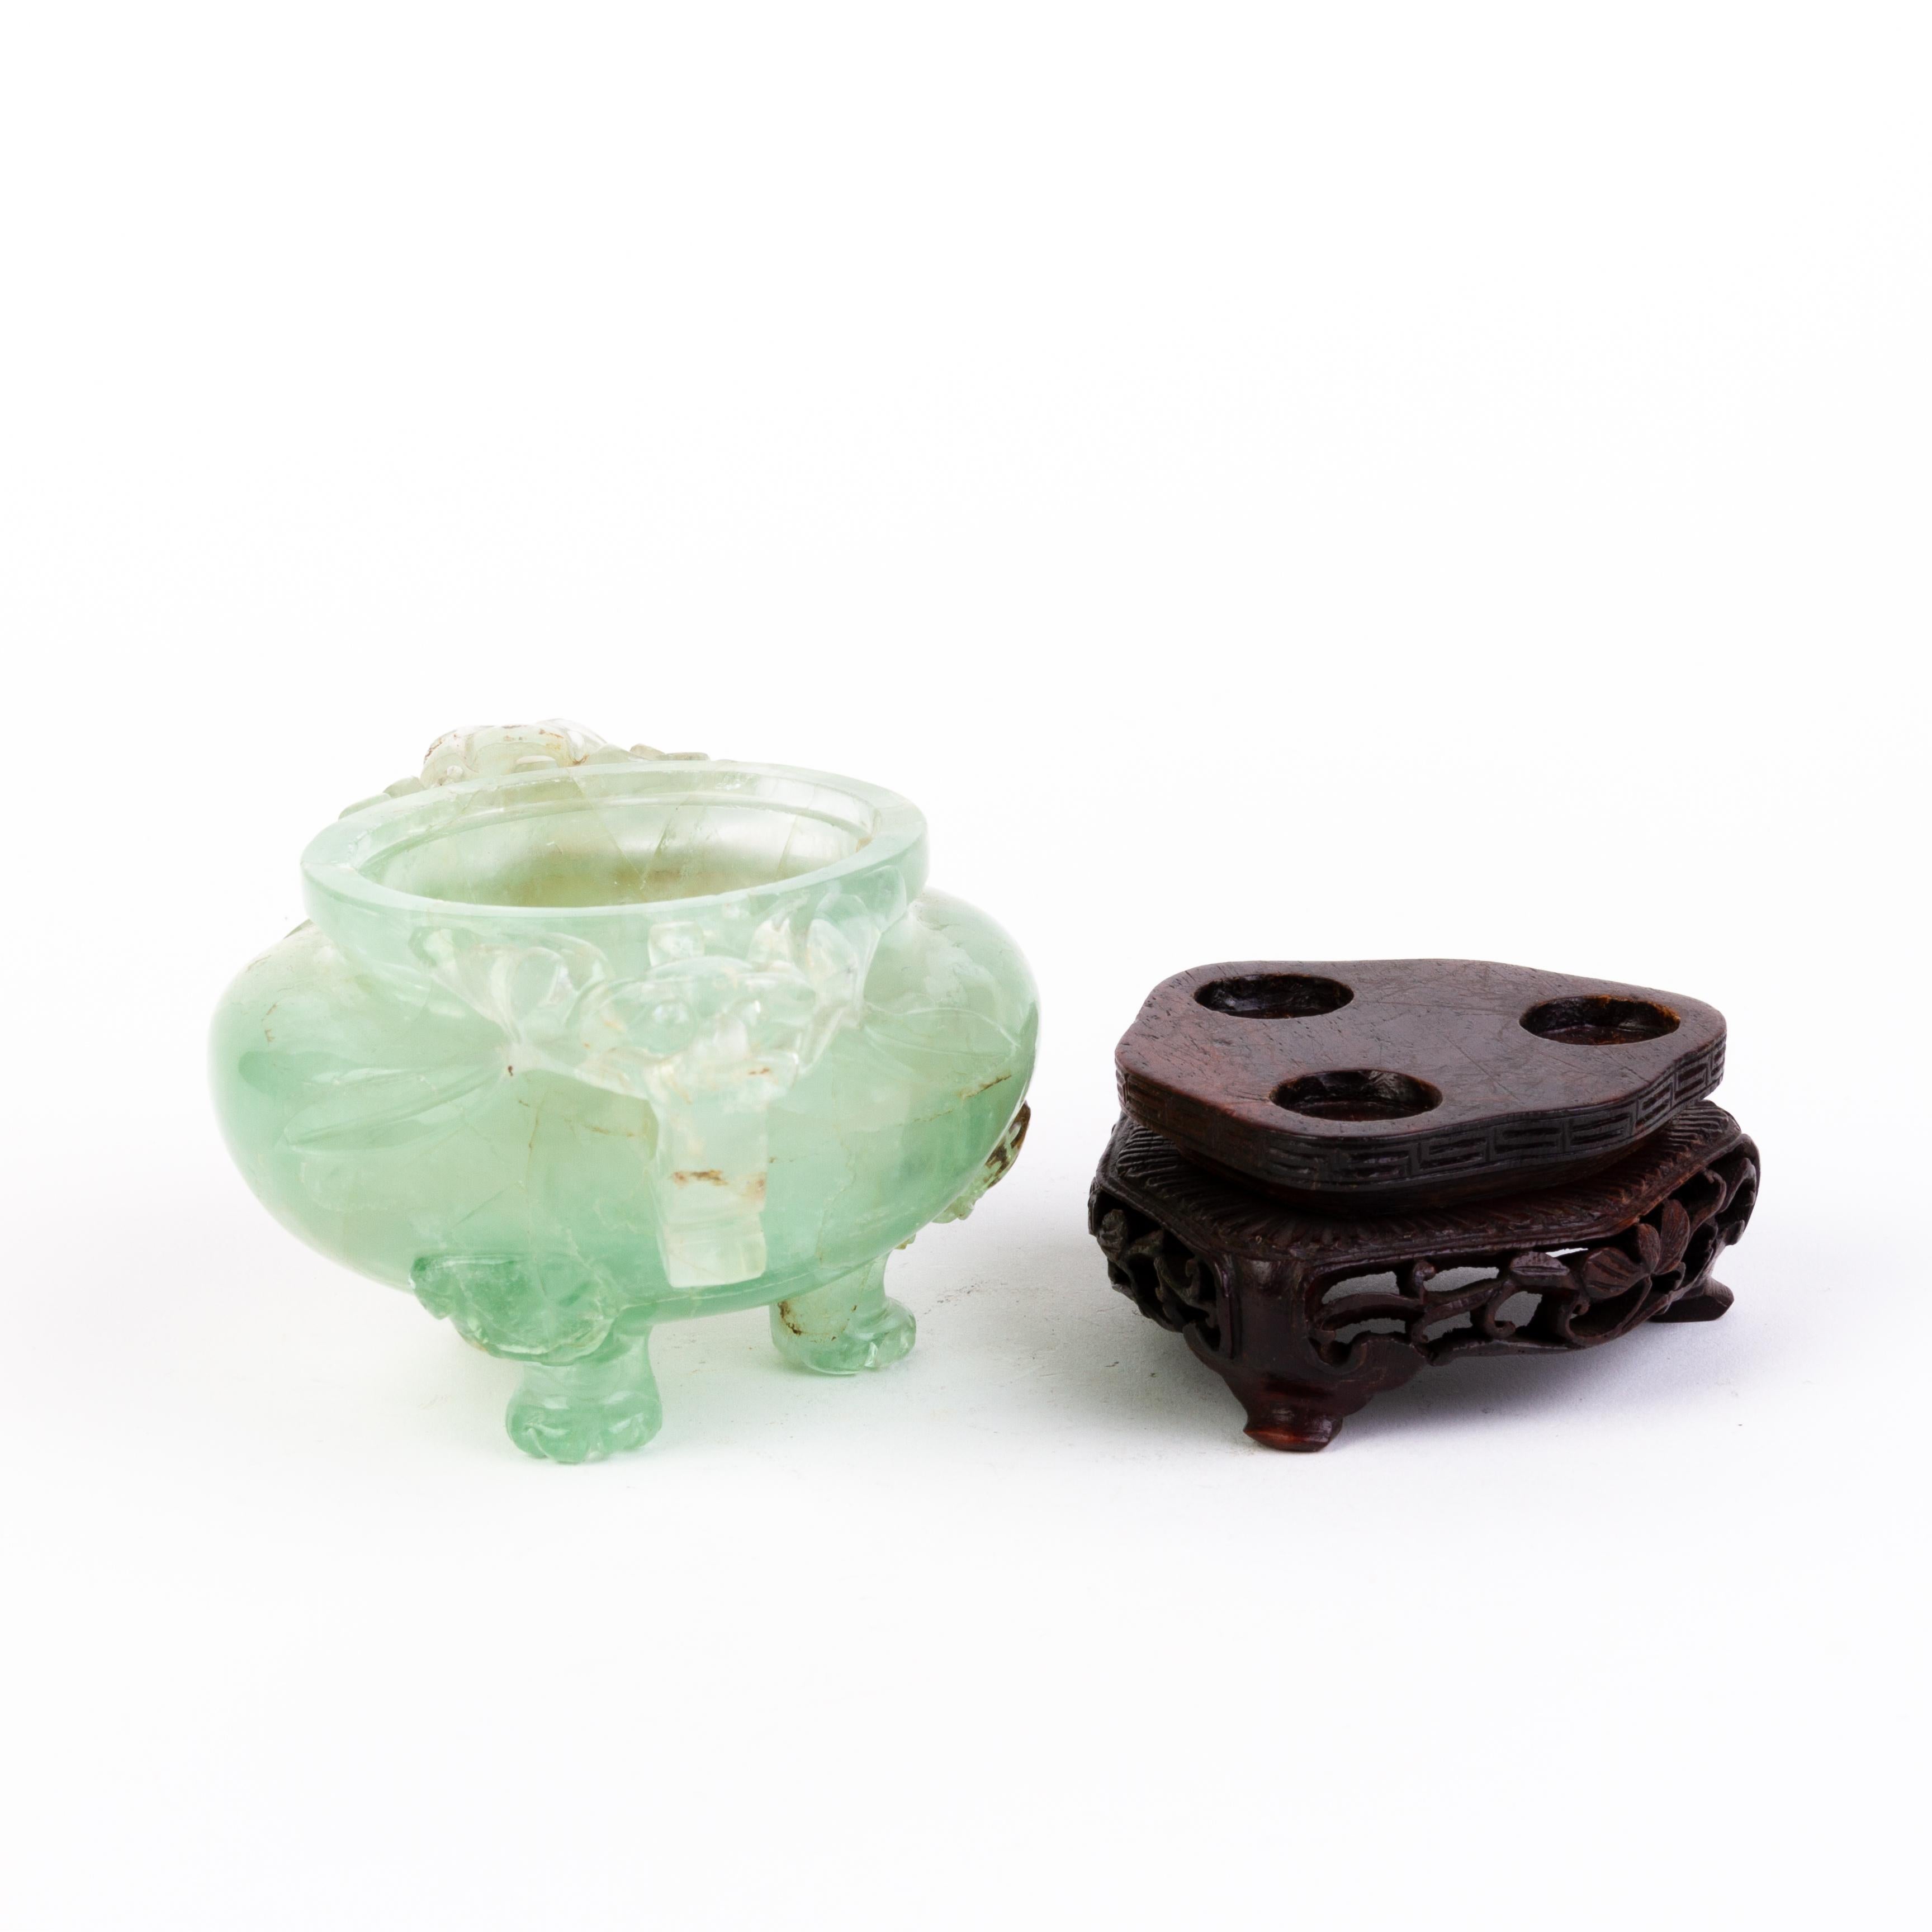 Chinese Qing Dynasty Lidded Jade Censer Vase Sculpture on Stand 19th Century  For Sale 1